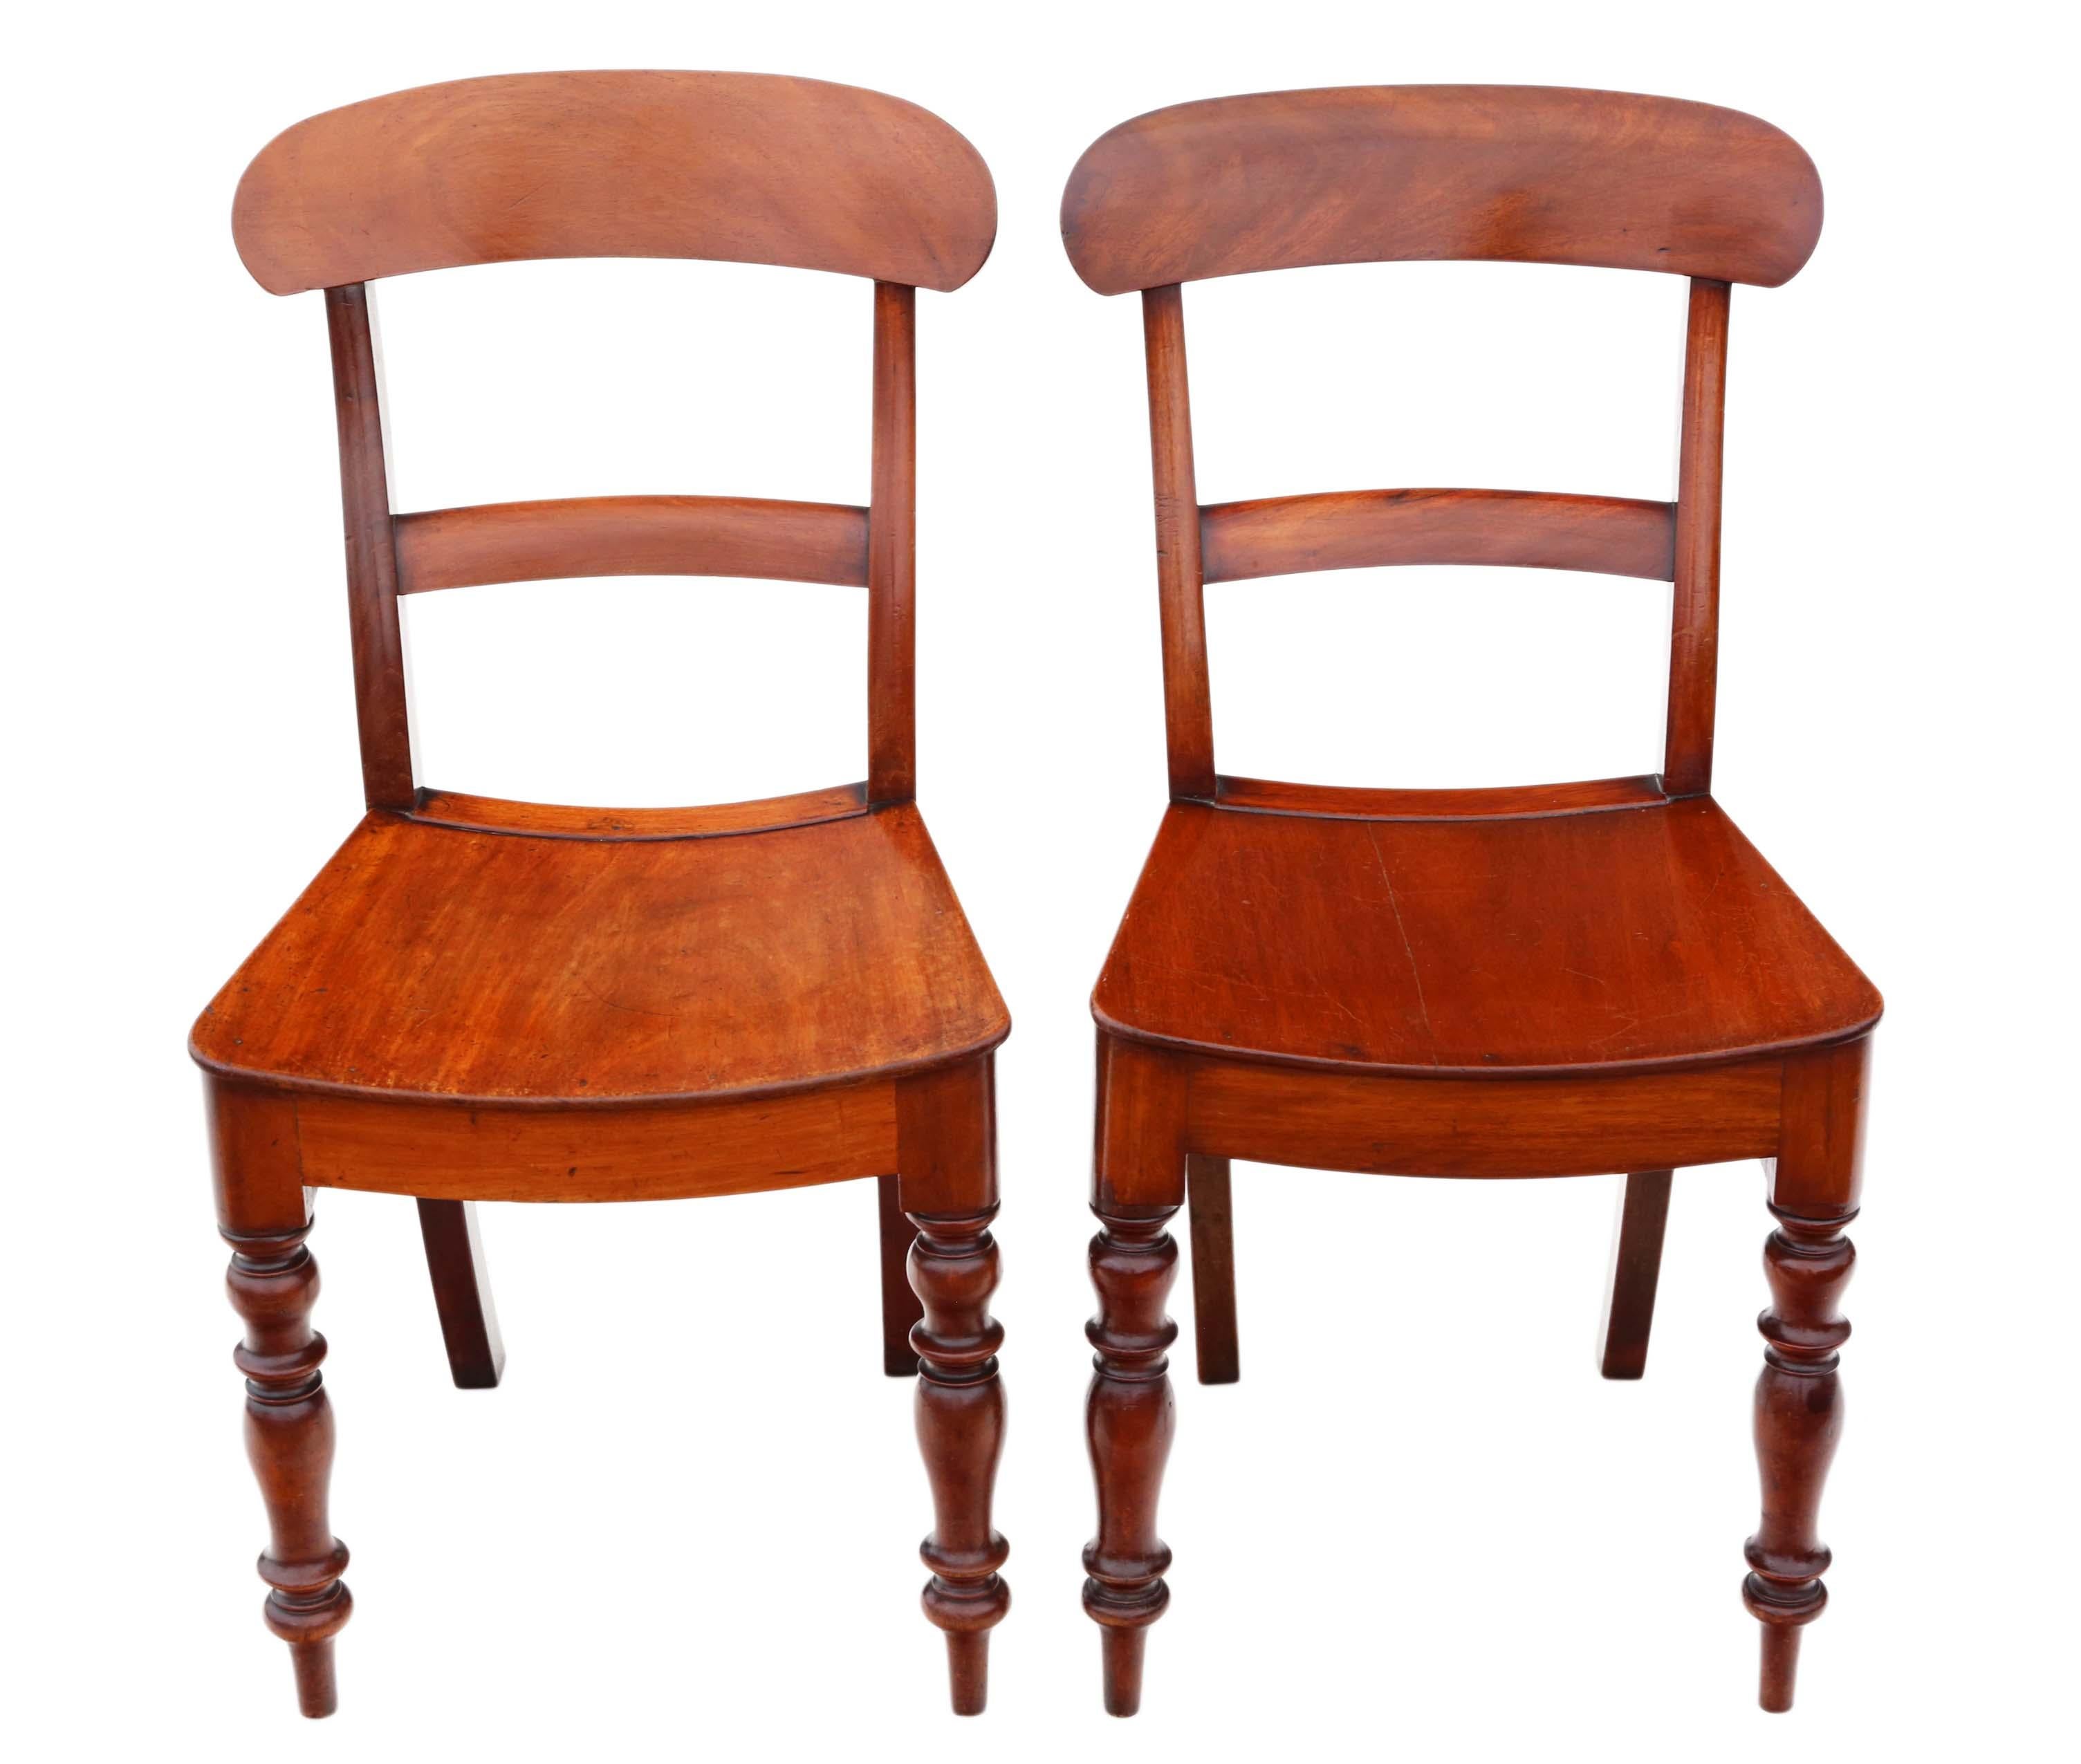 Mid-19th Century Antique Matched Set of 8 Mahogany Kitchen Dining Chairs, 19th Century